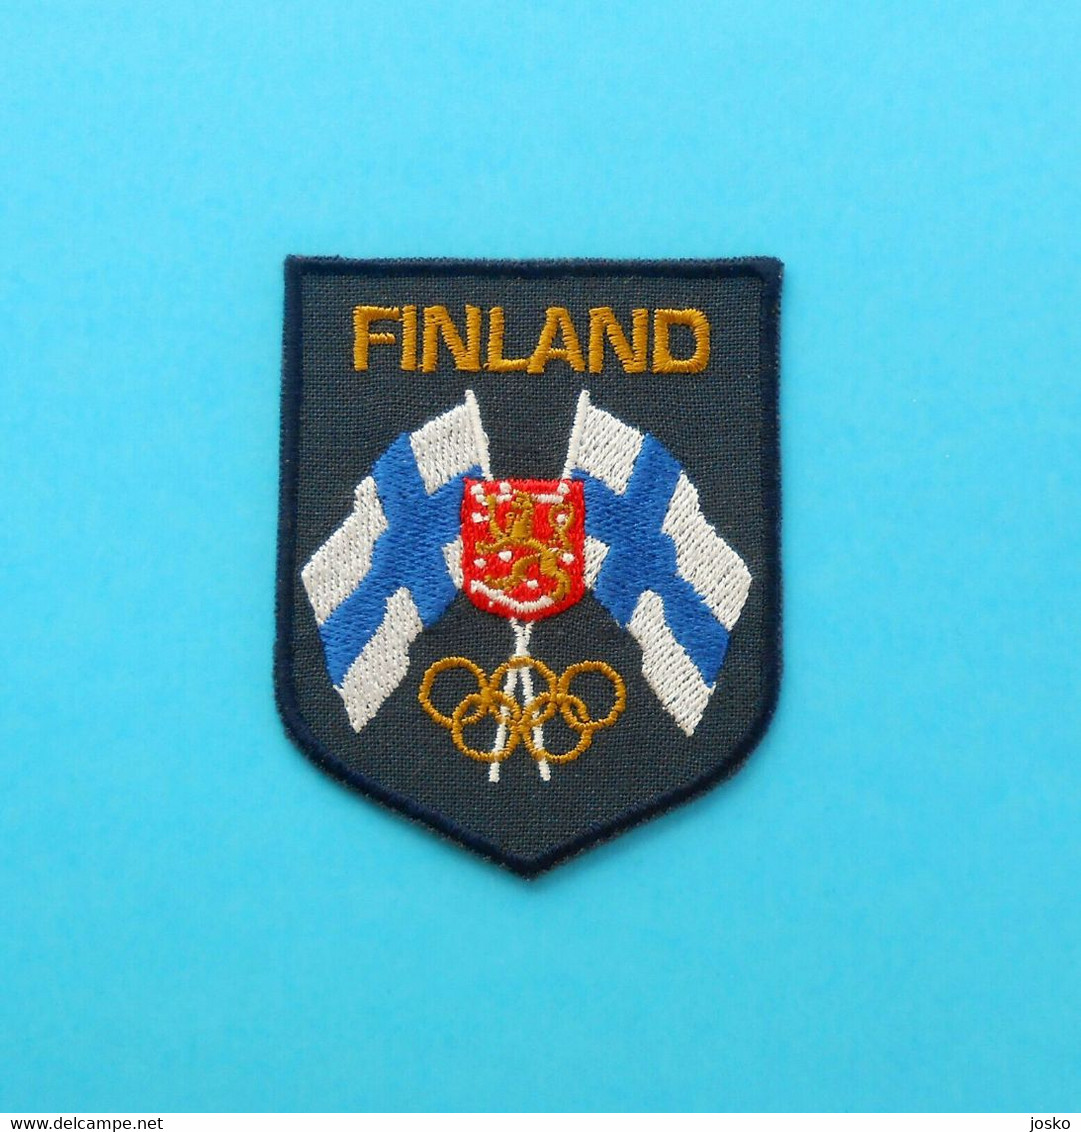 FINLAND NOC - Nice Rare Olympics Patch * Olympic Games Olympiad Olympia Olympiade Olimpische Spiele Olimpici - Kleding, Souvenirs & Andere